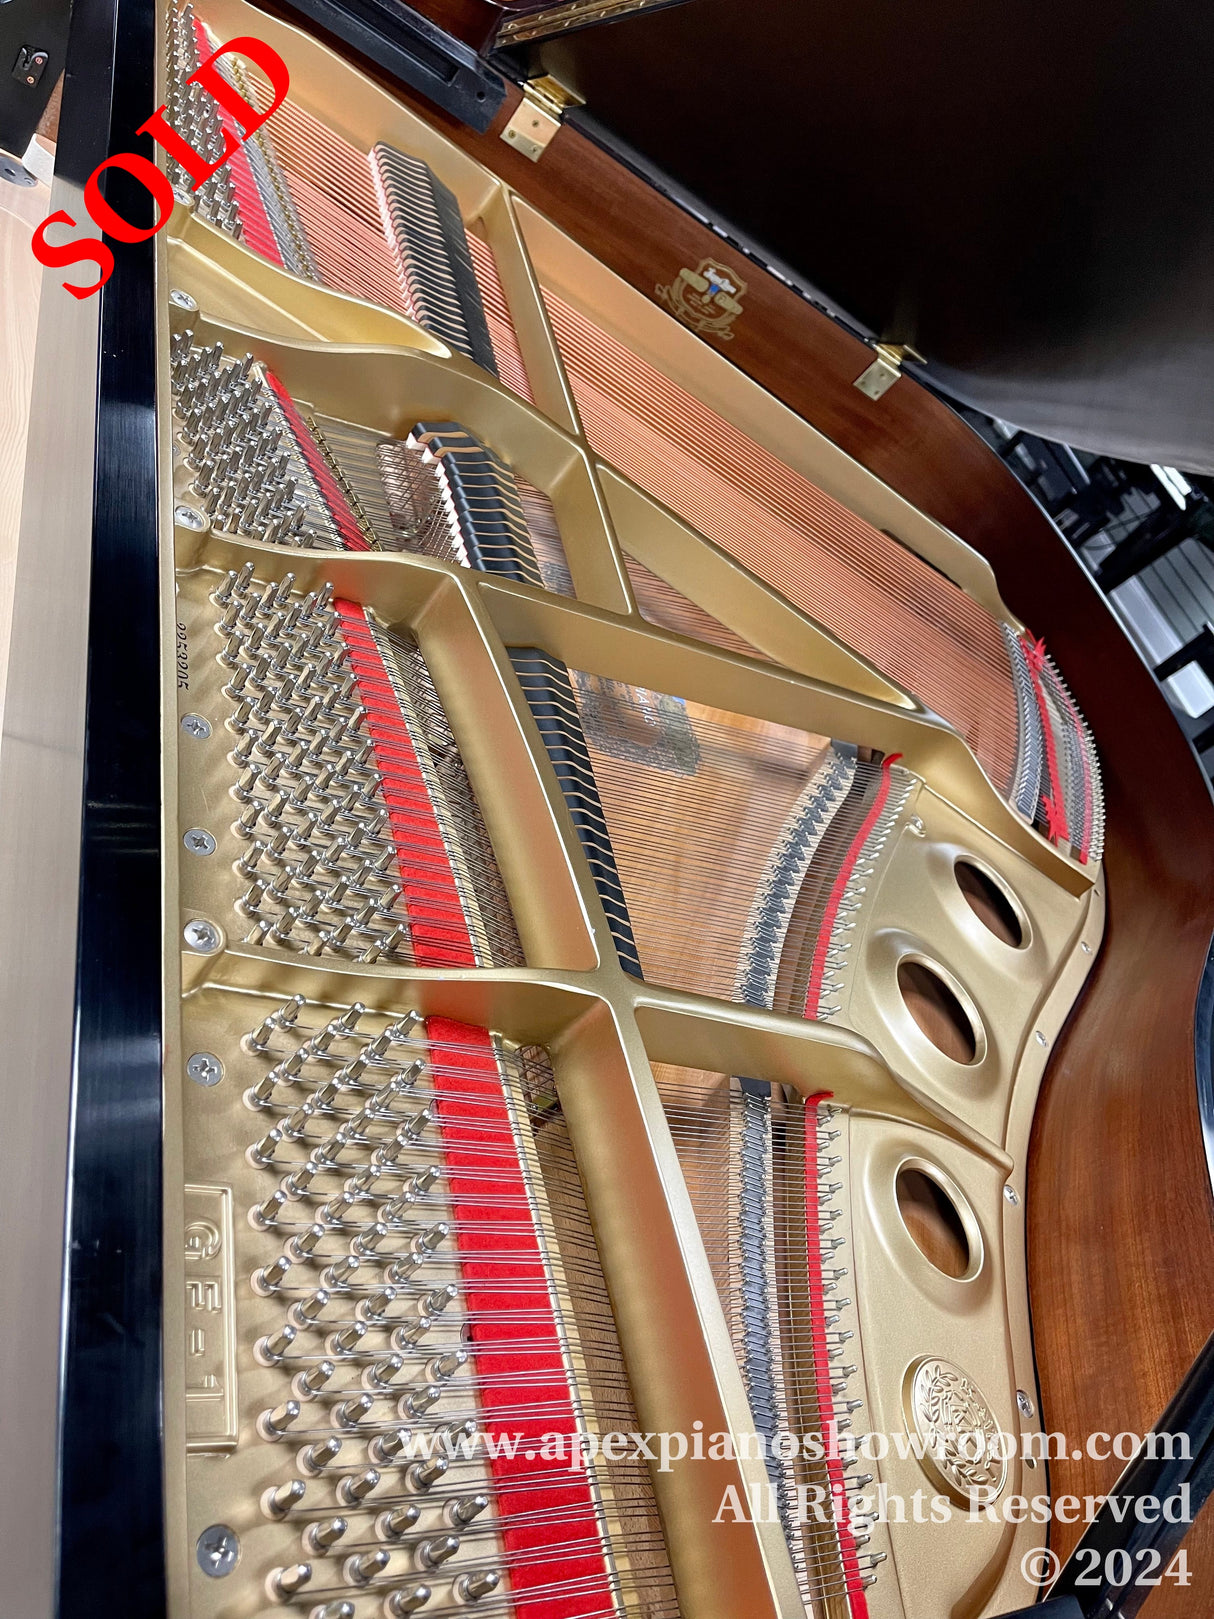 Interior view of a grand piano showcasing its strings and soundboard, with visible tuning pins, dampers, and the cast iron plate, indicative of high-quality piano craftsmanship.